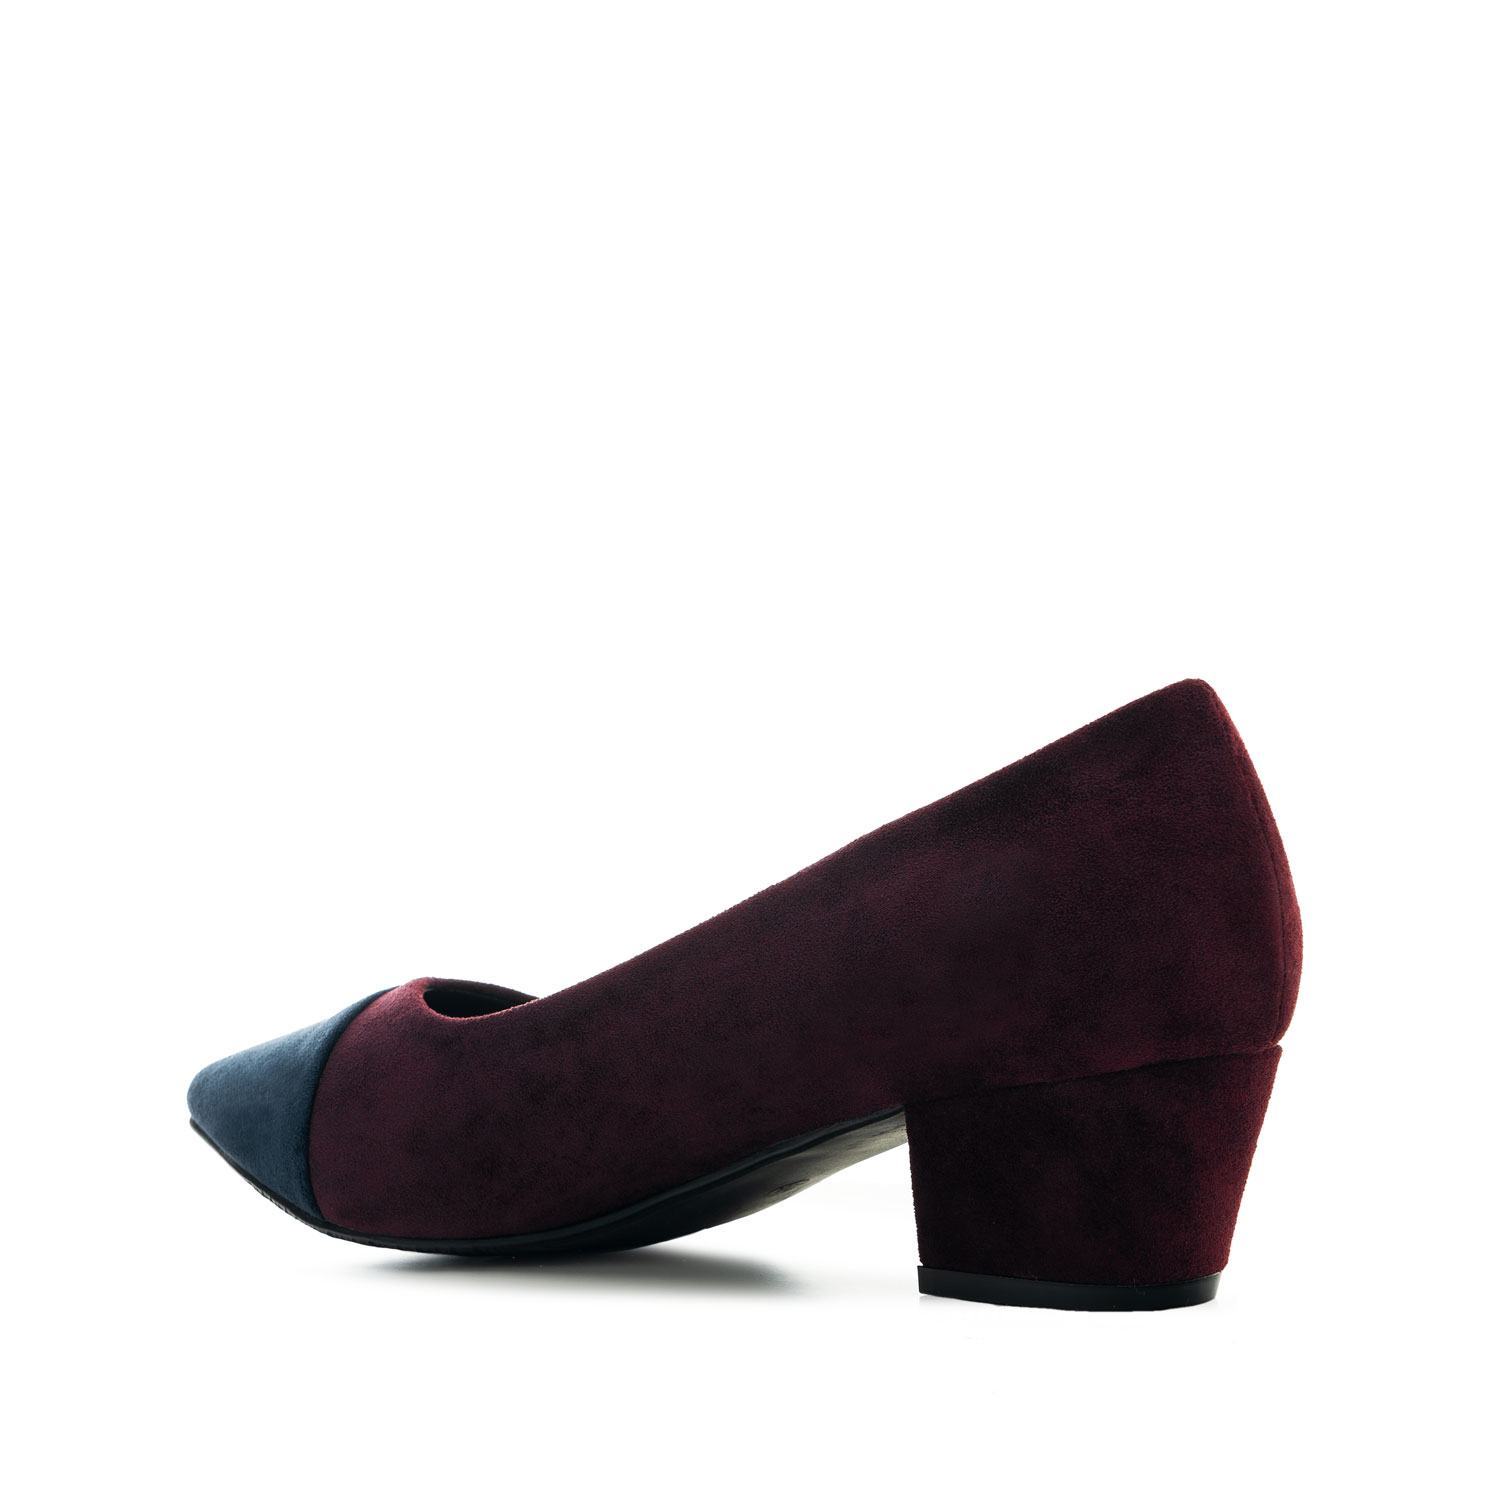 Toe Cap Court Shoes in Navy & Burgundy Suedette 